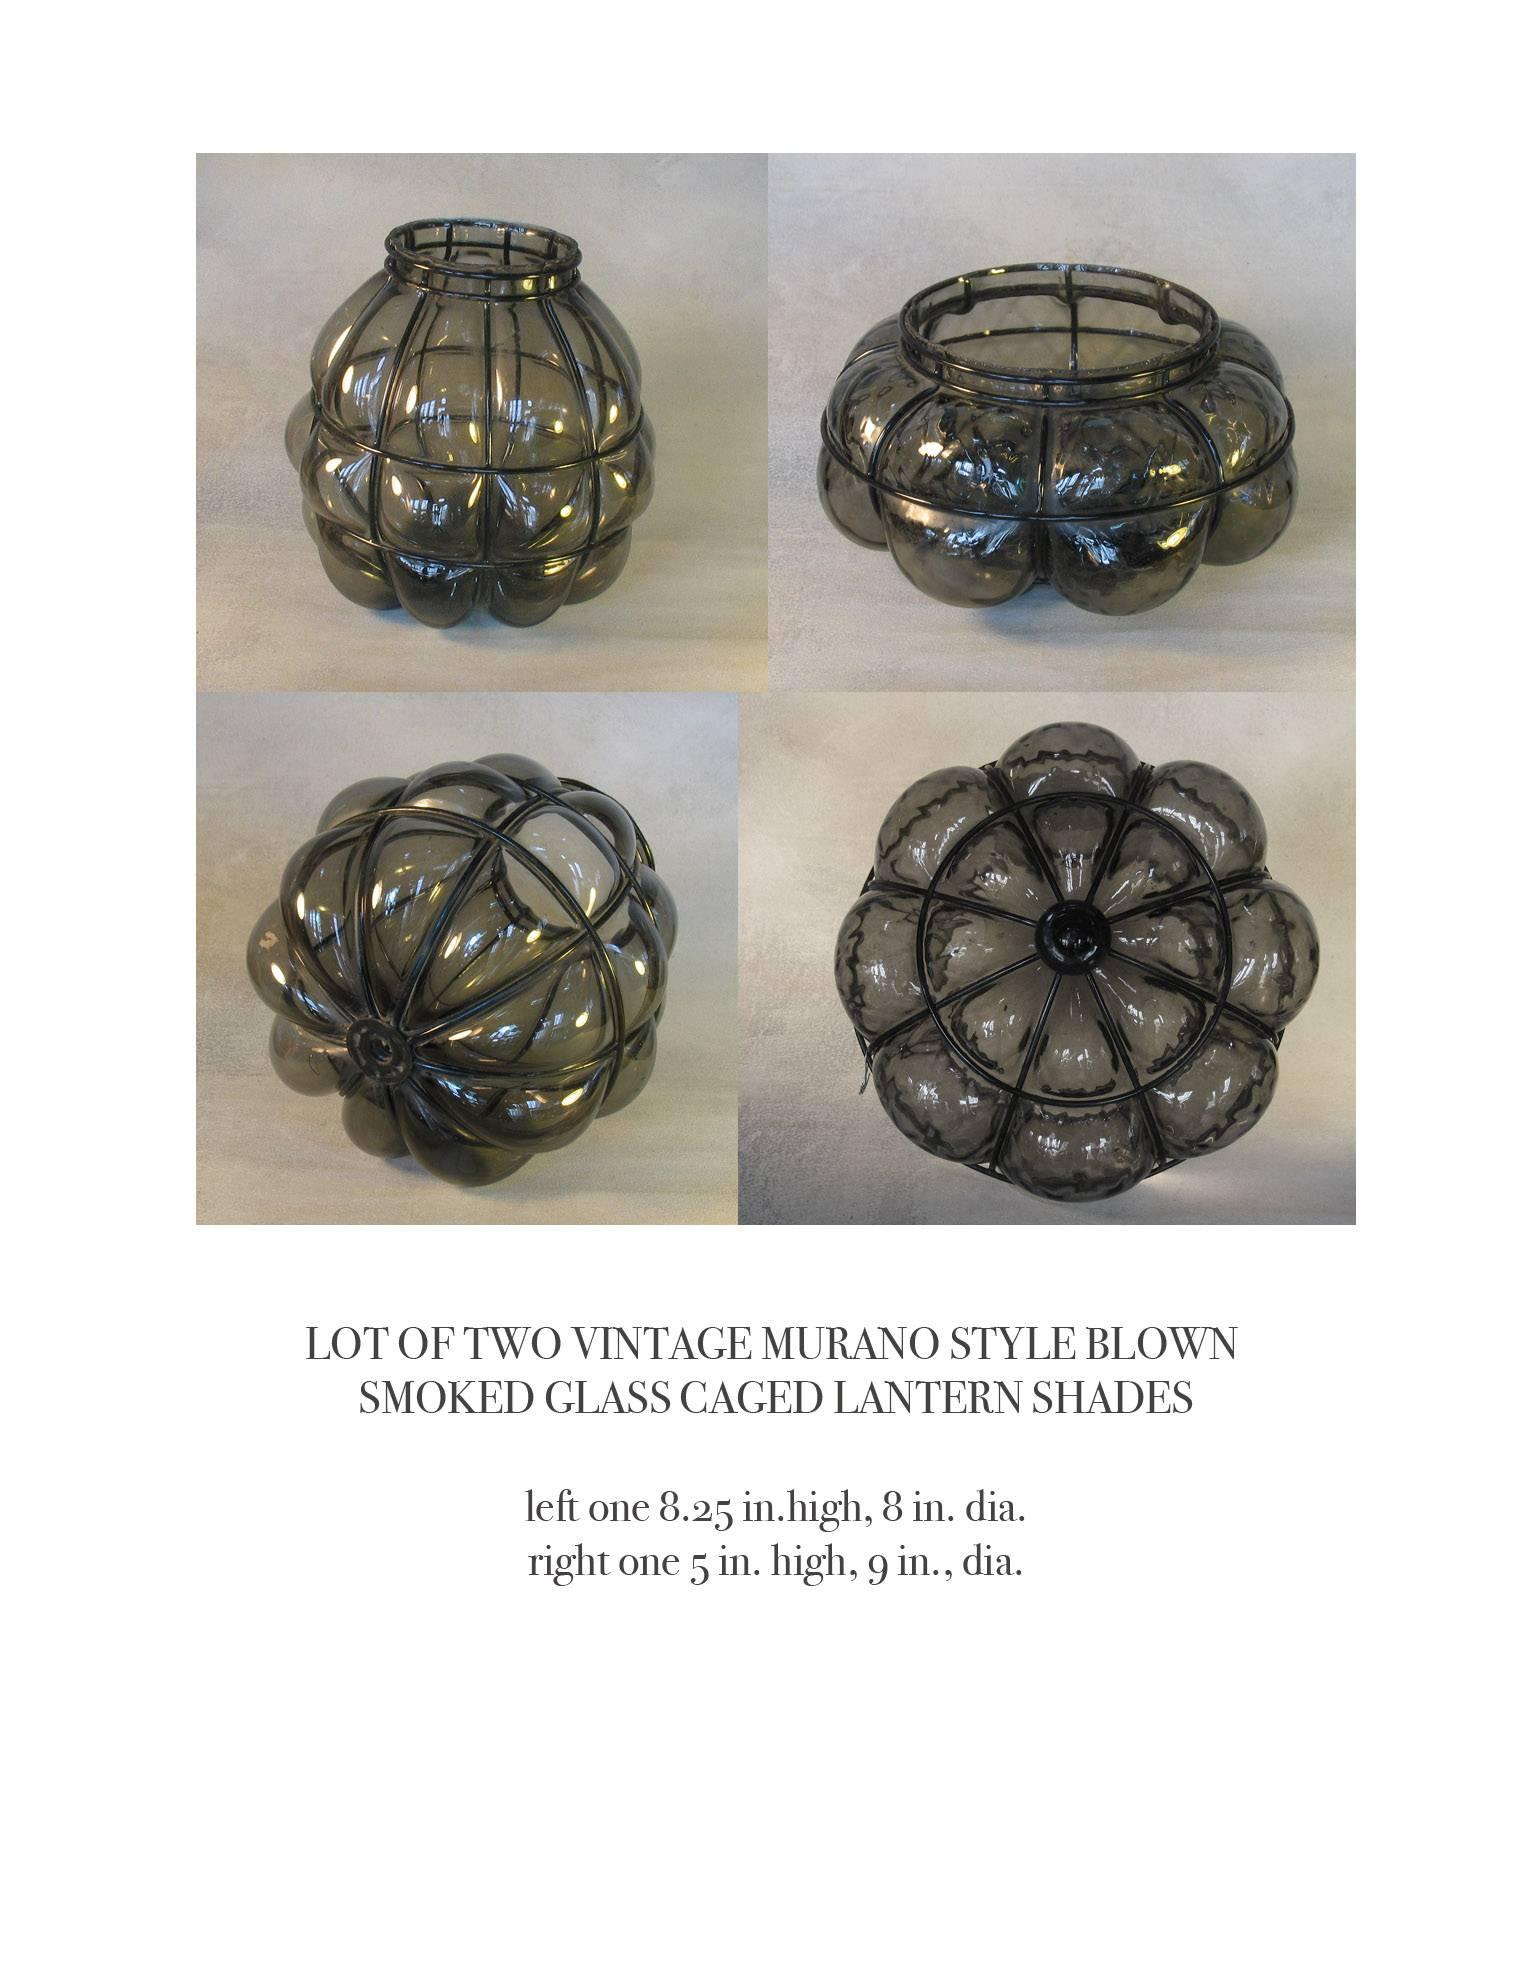 Lot of two vintage Murano style blown smoked glass caged lantern shades, caged in a wire basket form with extended globe protrusions. The shade on the left measures 8 1/2